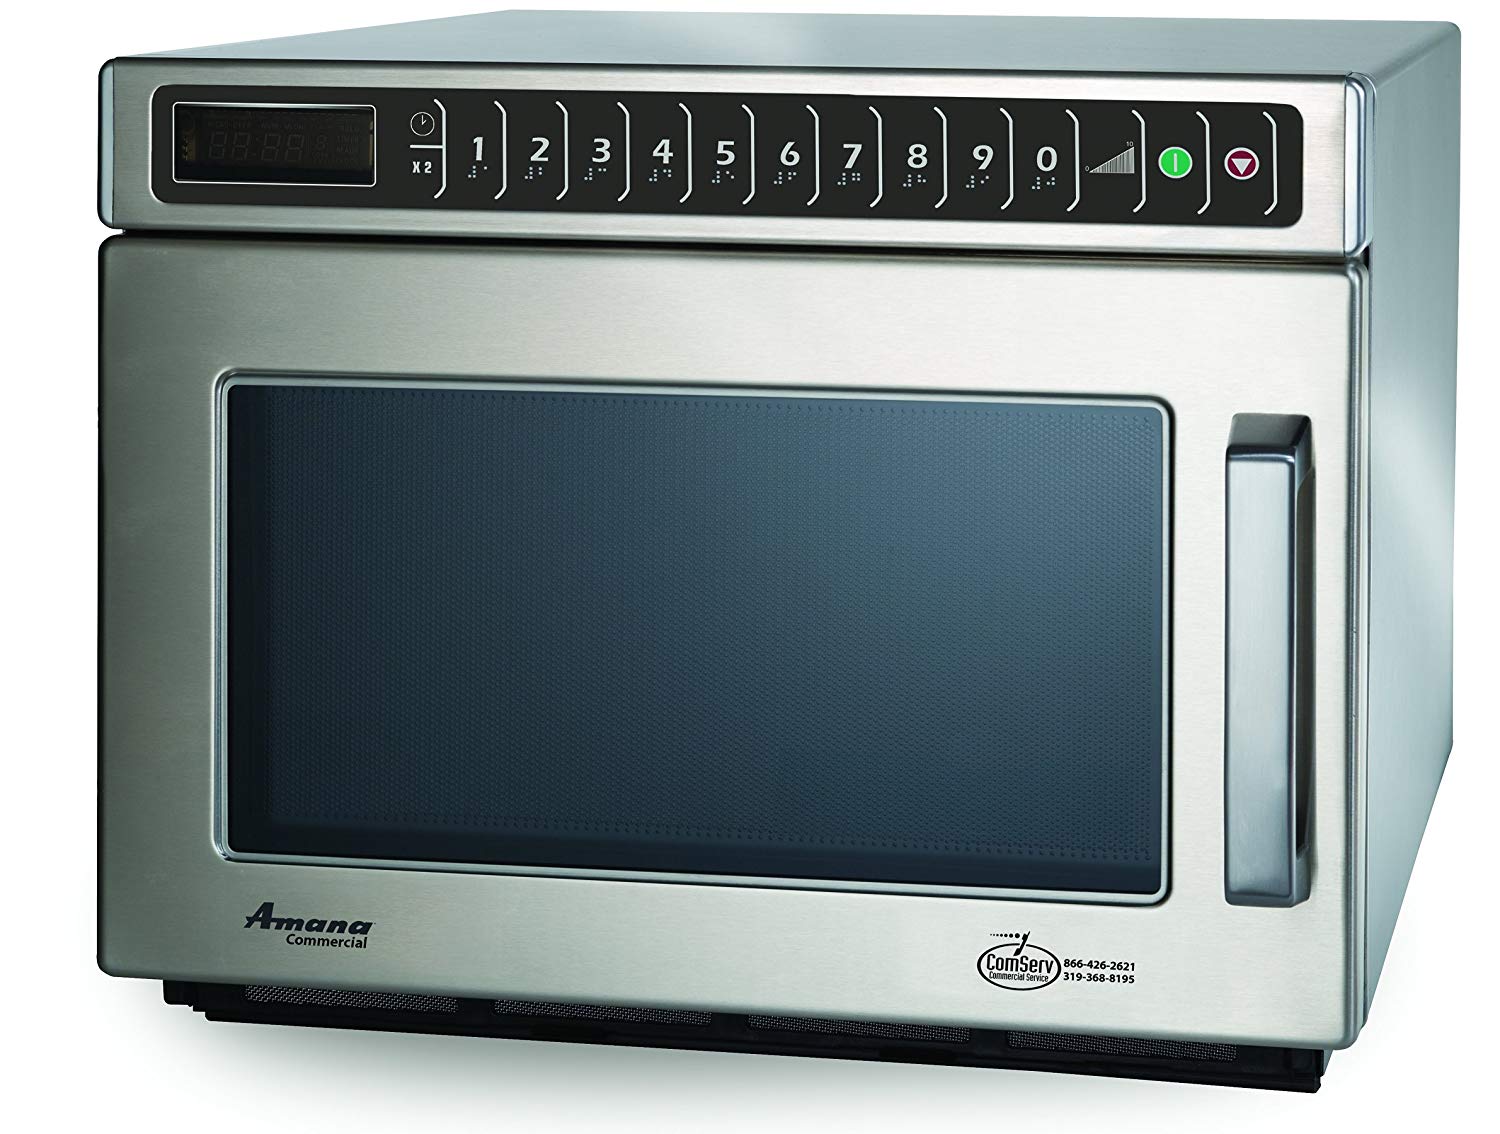 Amana’s Commercial Microwave Ovens